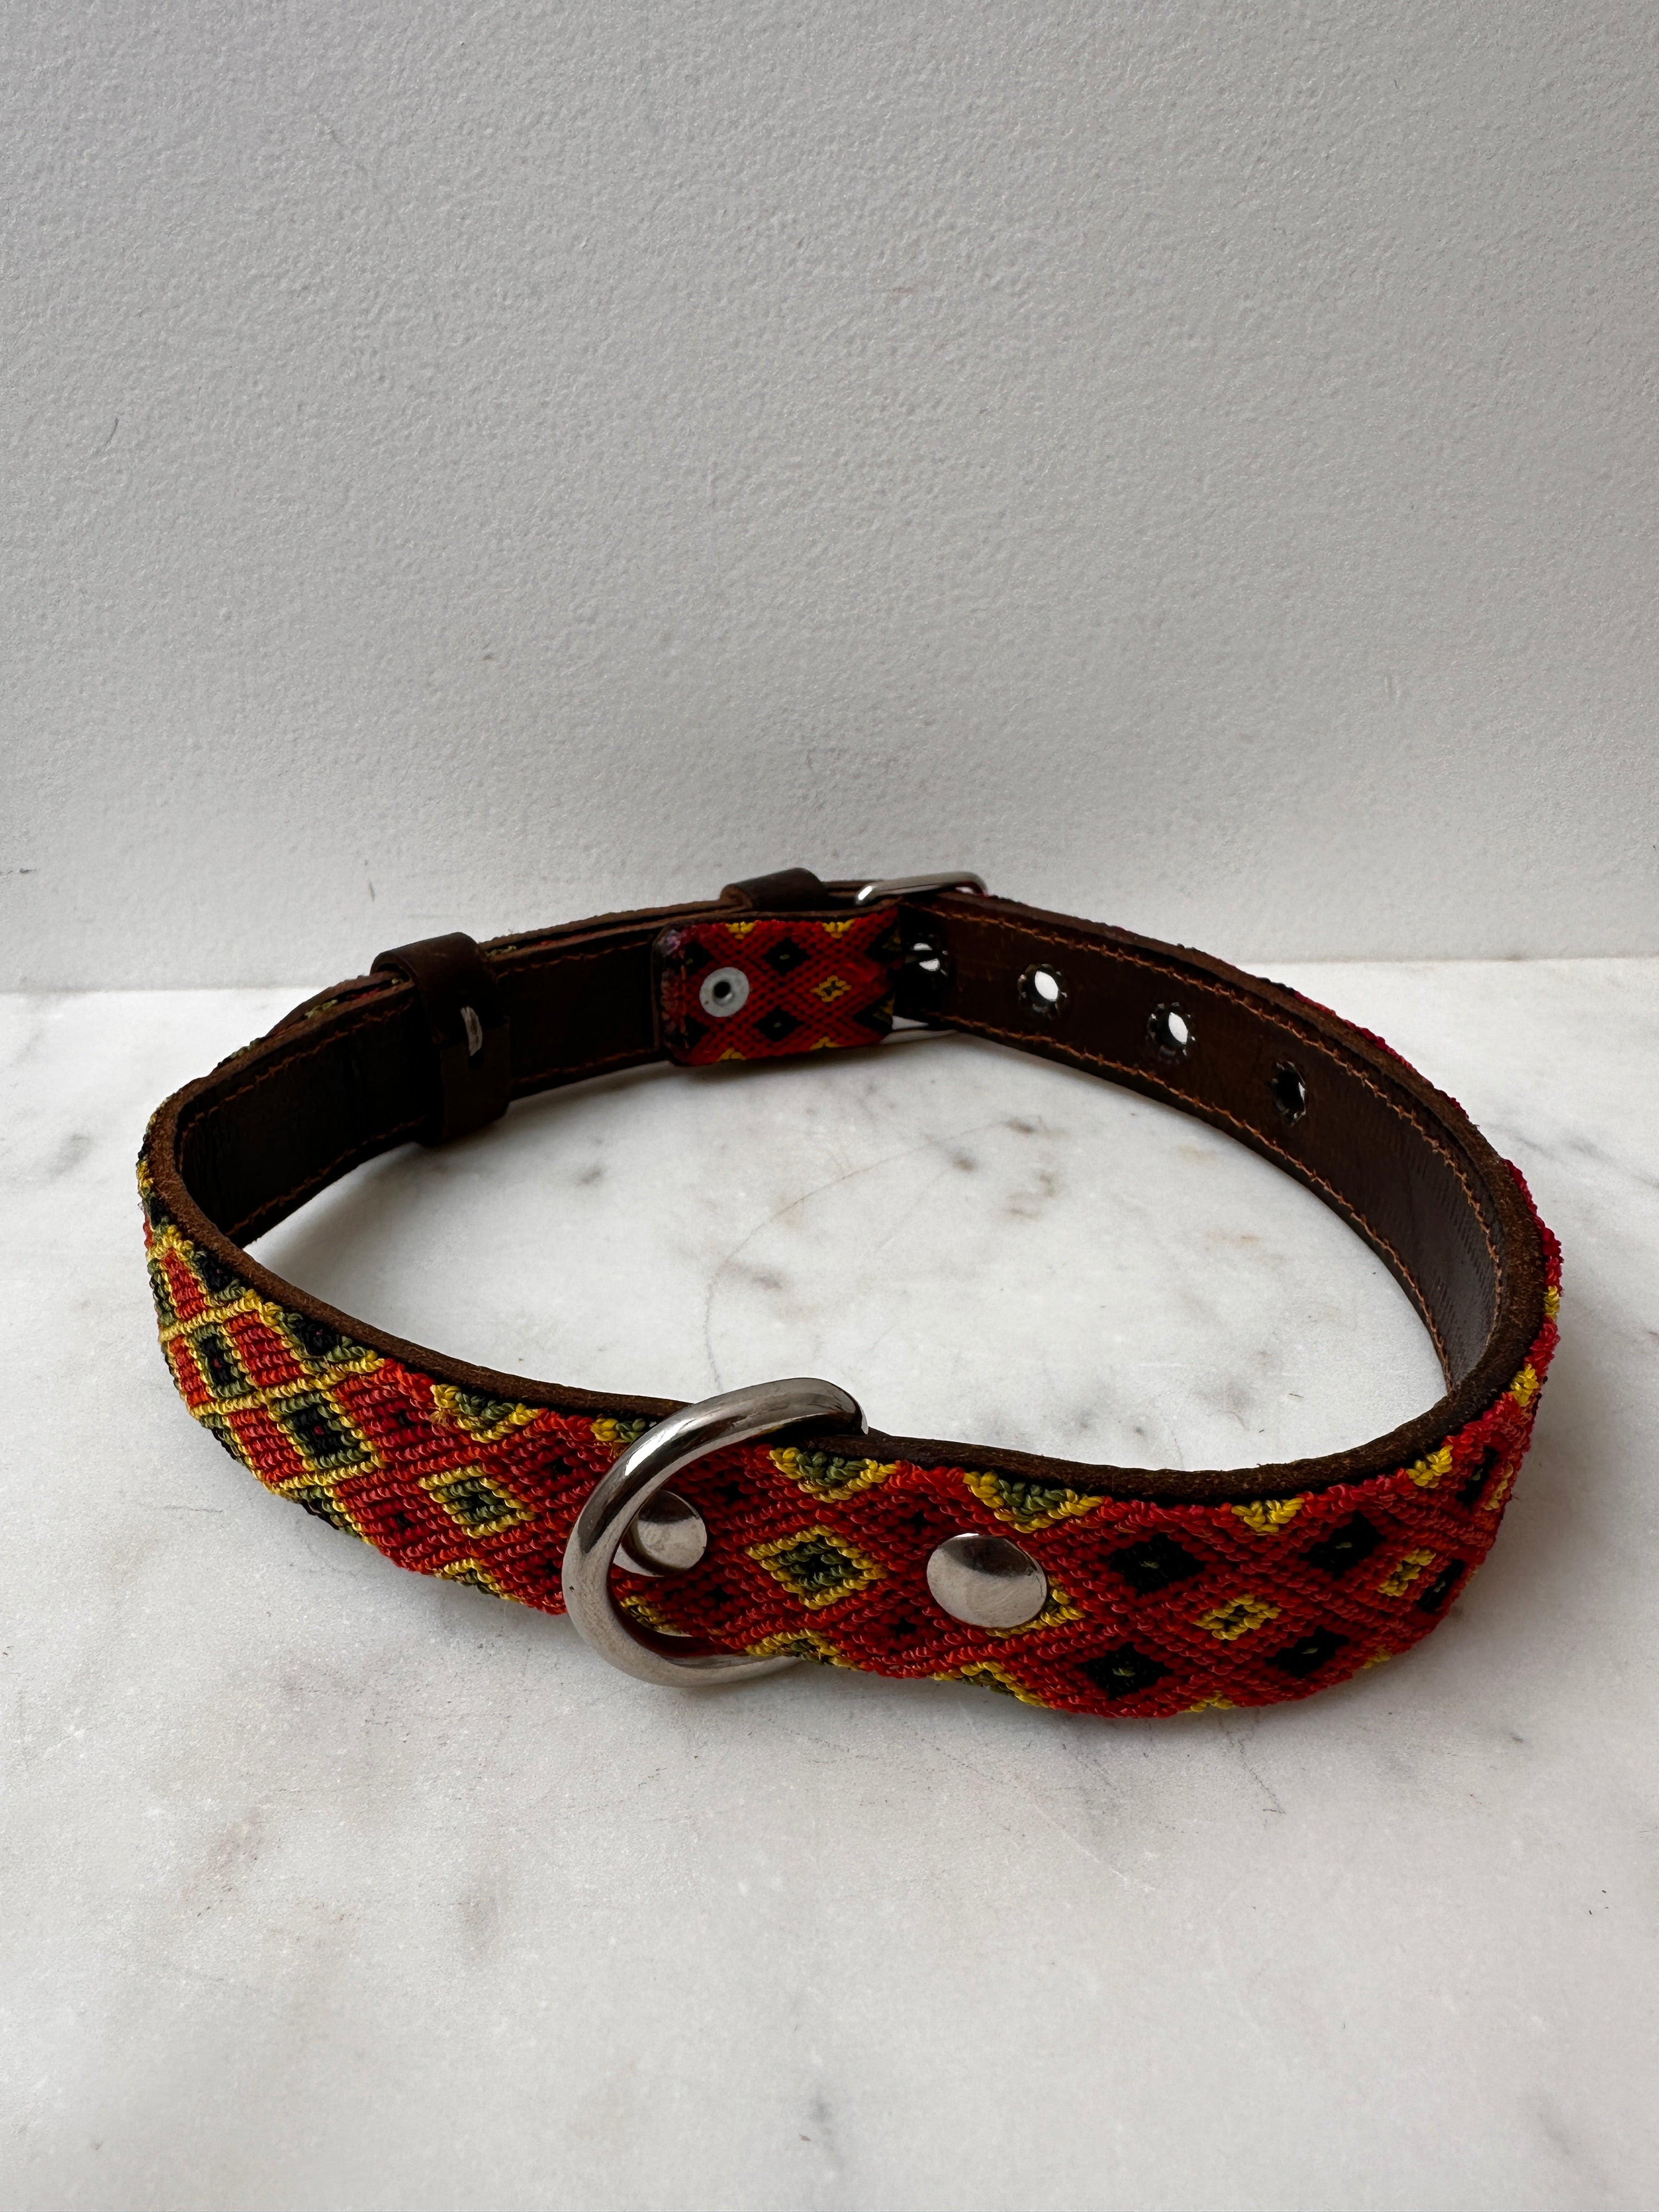 Future Nomads Homewares One Size Huichol Fully Embroidered Dog Collar L7